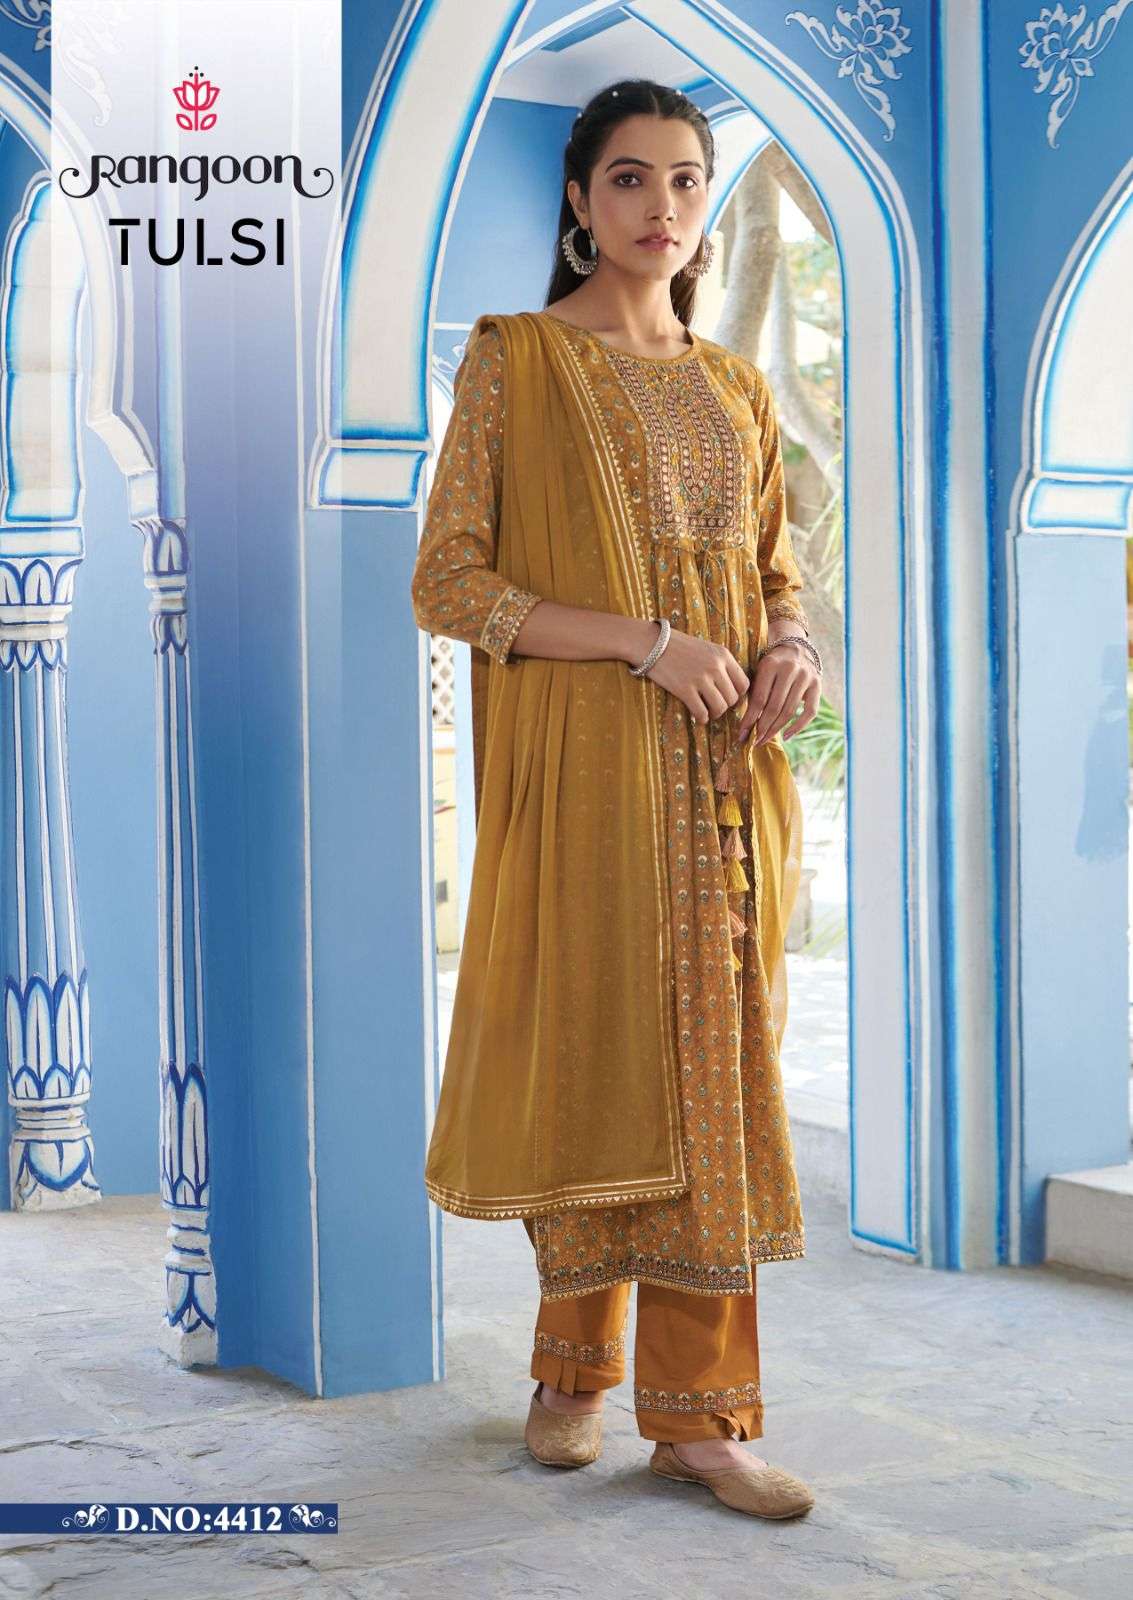 Tulsi Modal Print With Fancy Embrodery Seqonce Work And  NAIRA CUT.Style